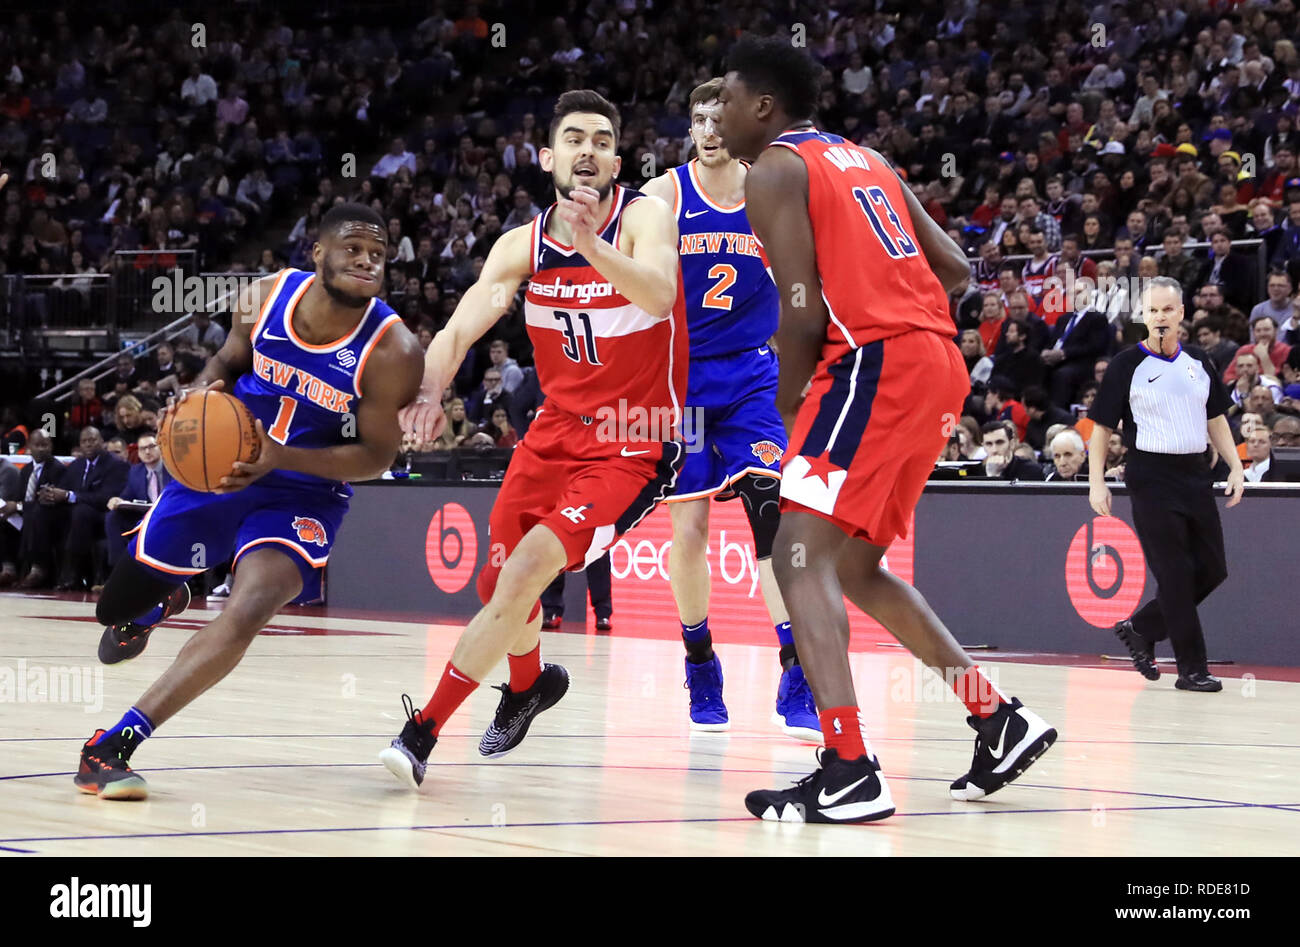 New York Knicks' Emmanuel Mudiay (left) and Washington Wizards' Tomas Satoransky (second left) battle for the ball during the NBA London Game 2019 at the O2 Arena, London. Stock Photo